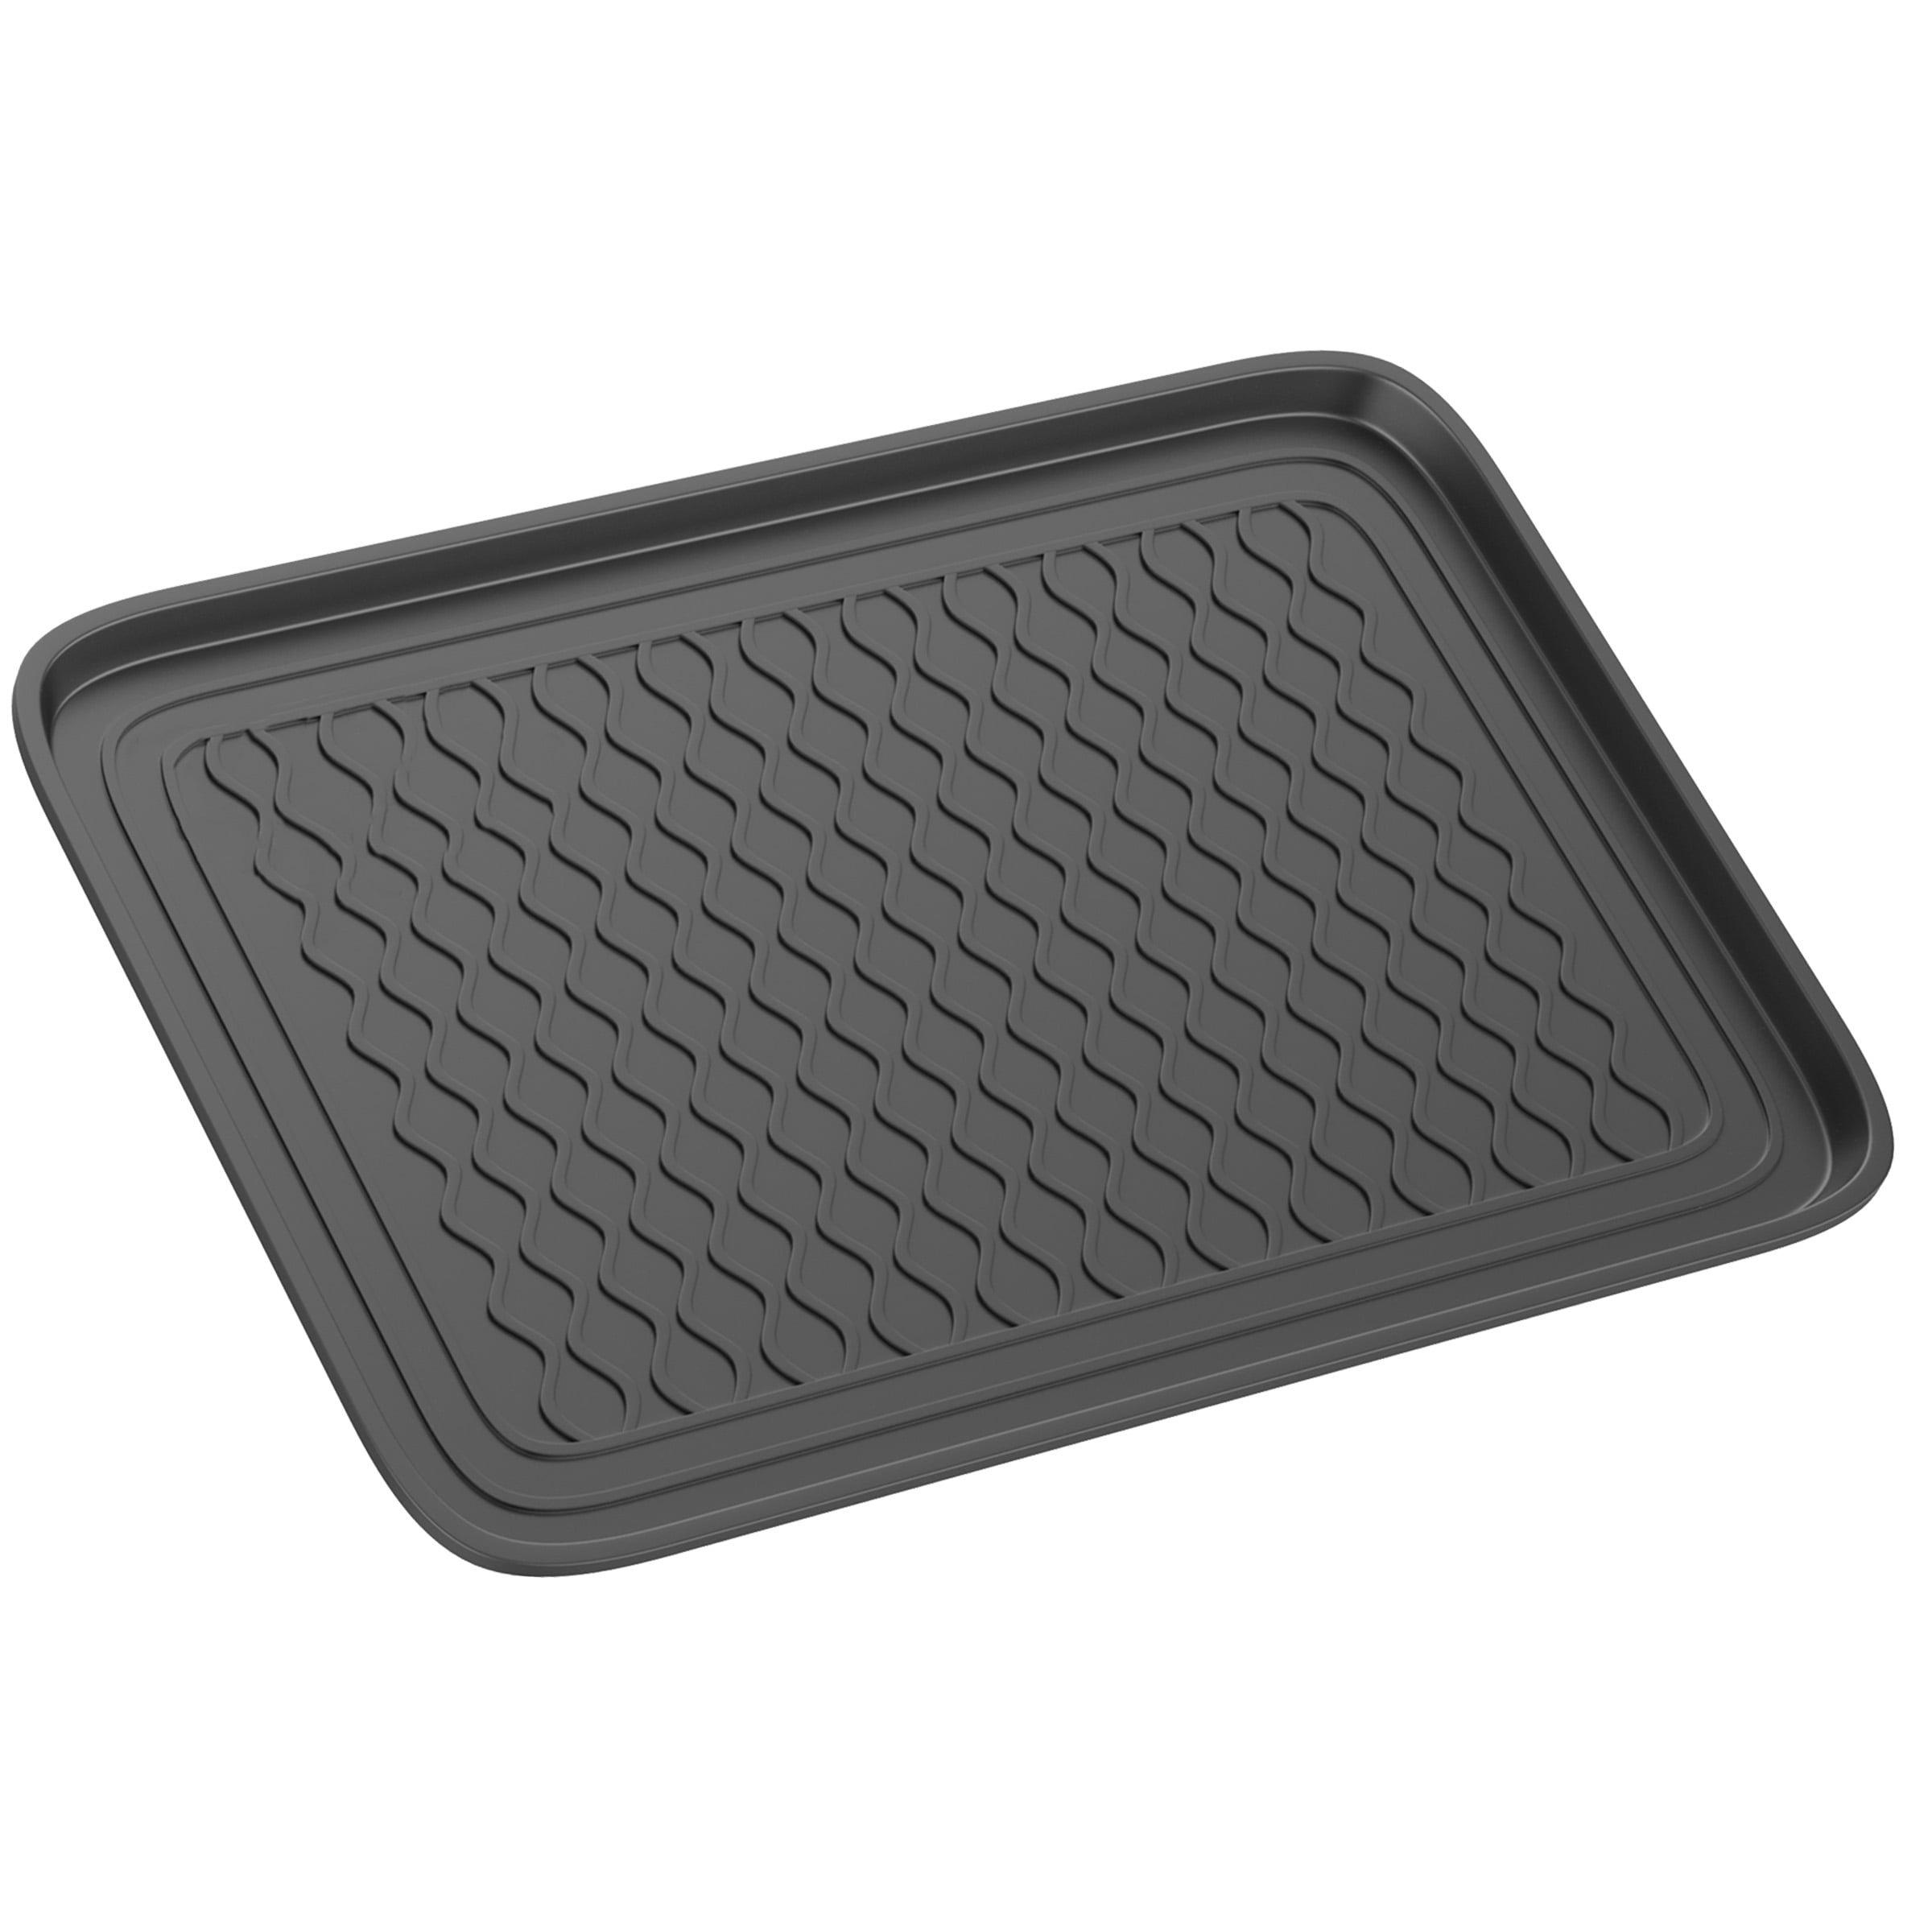 Trimate All Weather Boot Tray, Extra Large Size Extra Large, 40Ax20A(Black)